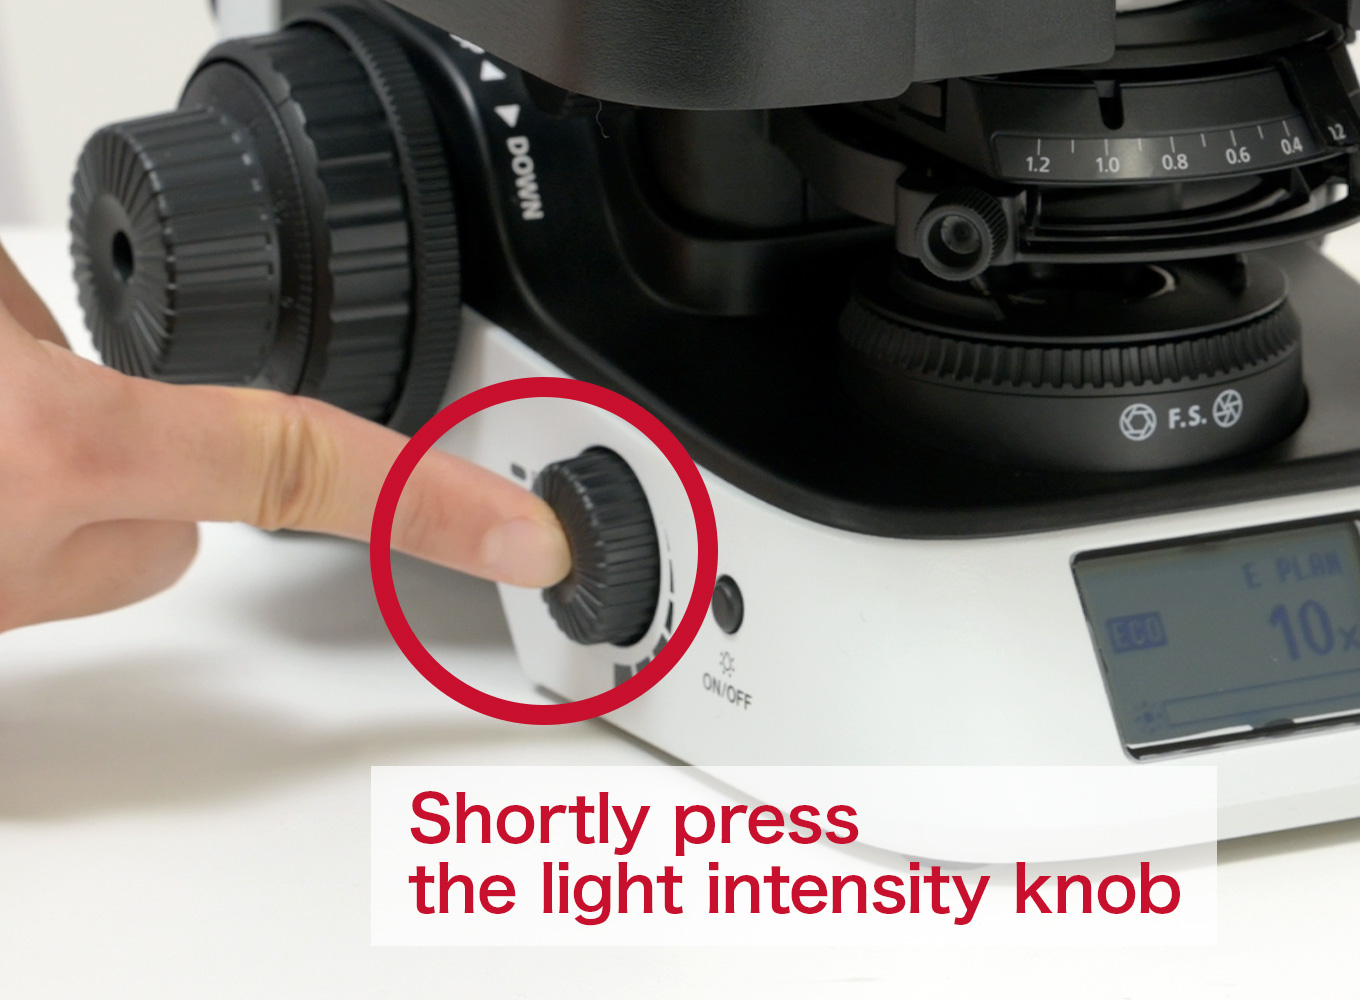 press and hold the light intensity knob on the left side.